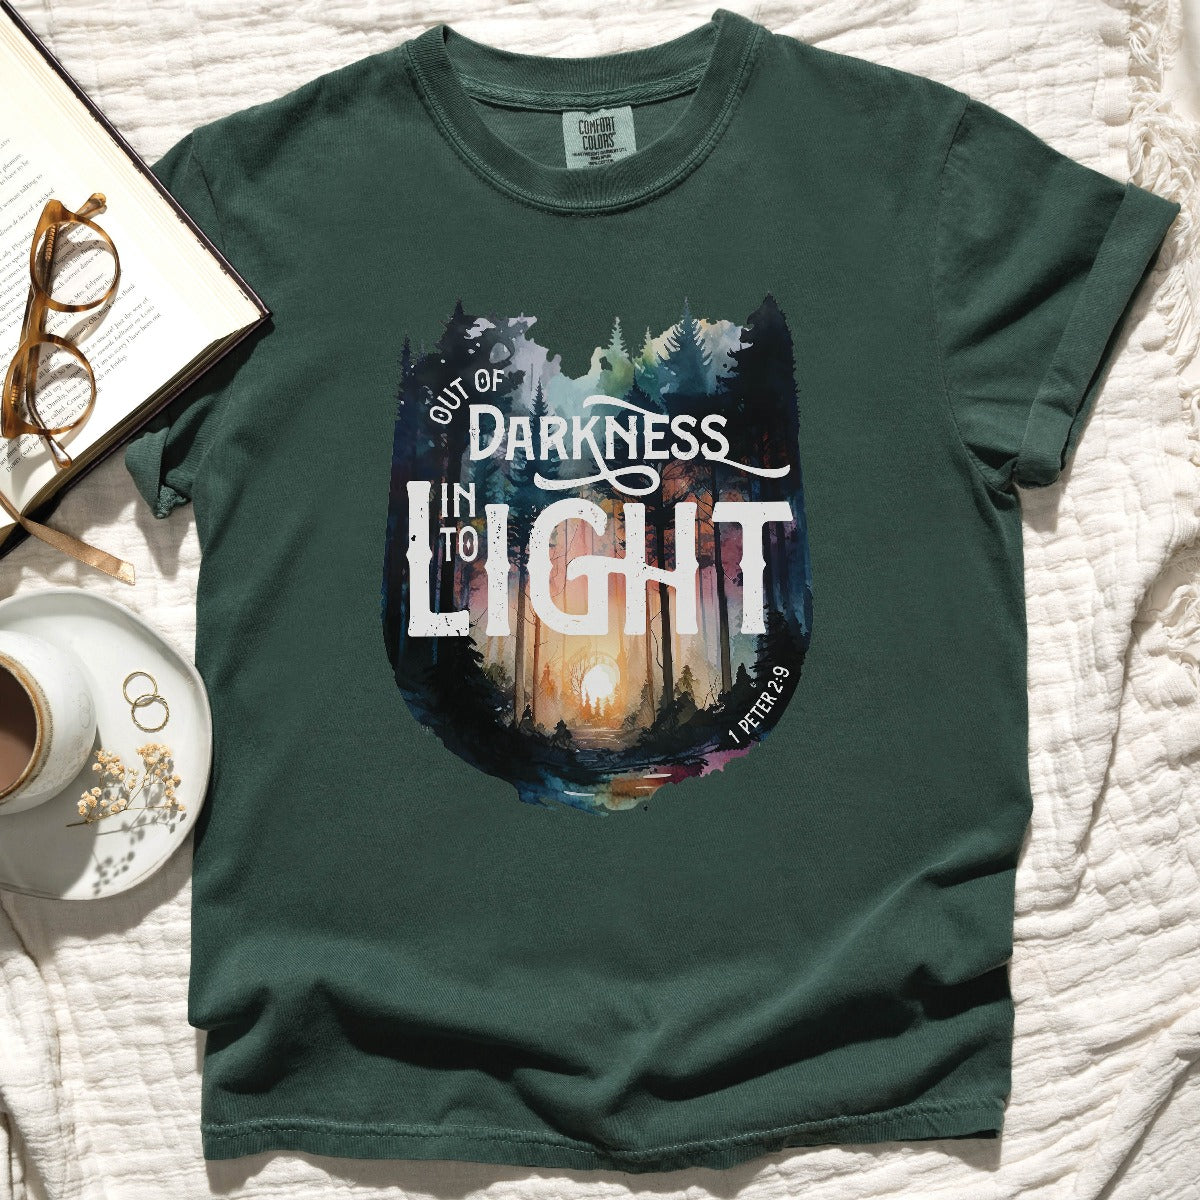 Blue Spruce dark green color garment dyed Comfort Colors C1717 unisex faith-based Christian t-shirt with "Out of Darkness, Into Light" 1 Peter 2:9 bible verse and watercolor moody forest trees outdoor scene, designed for men and women